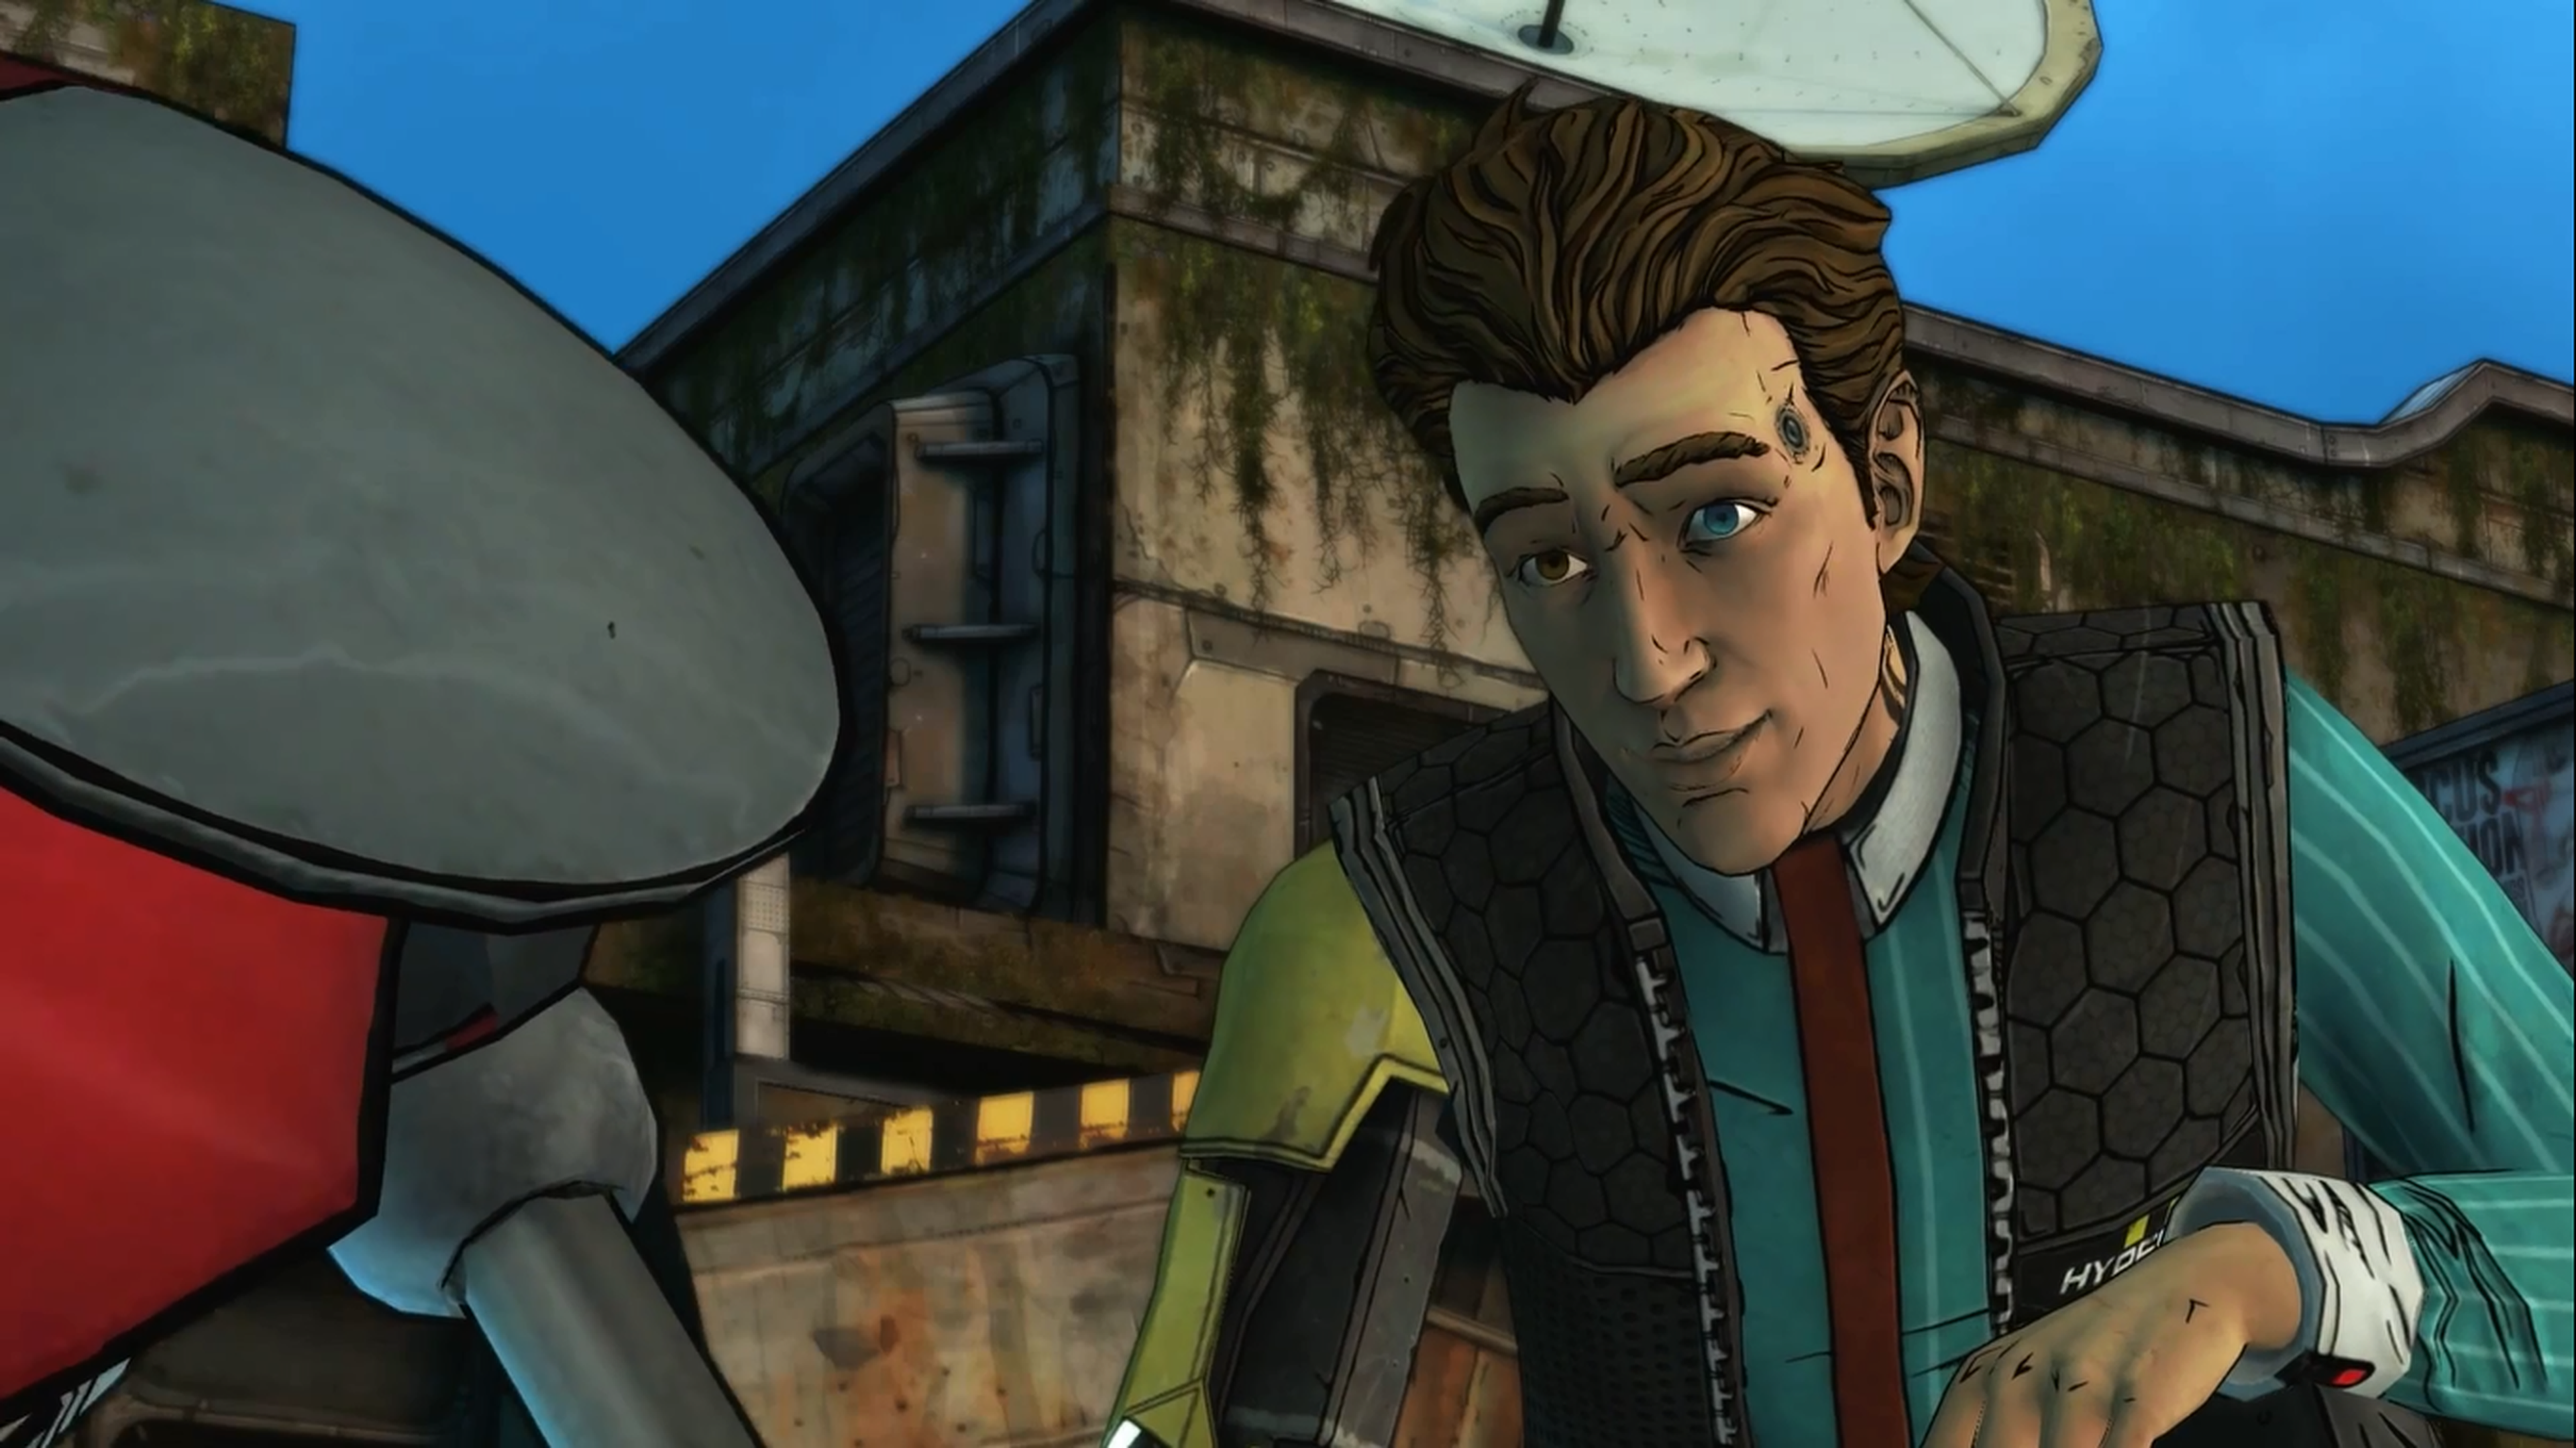 Tales from the Borderlands - Episode 3, 'Catch a Ride' Trailer